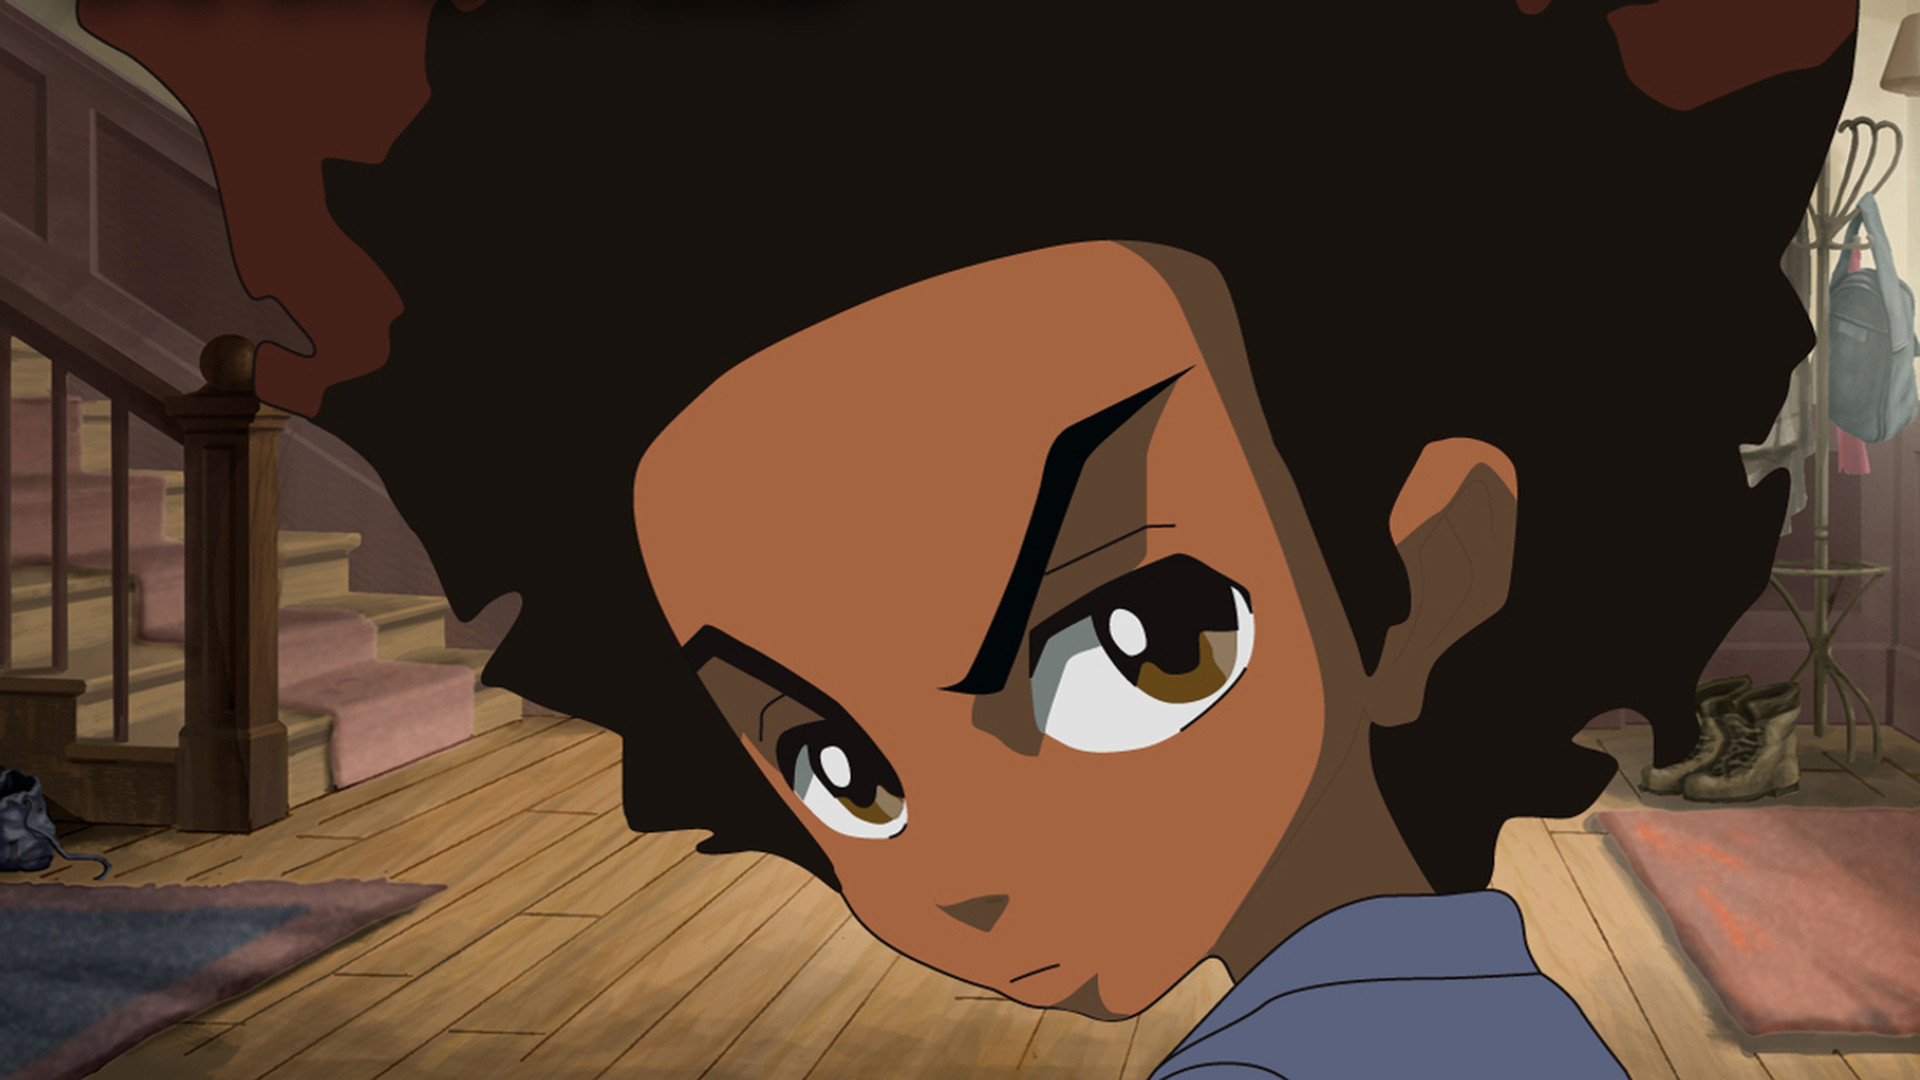 Boondocks Wallpaper 4k Boondocks Wallpapers ·① Wallpapertag We Would Like To Show You A